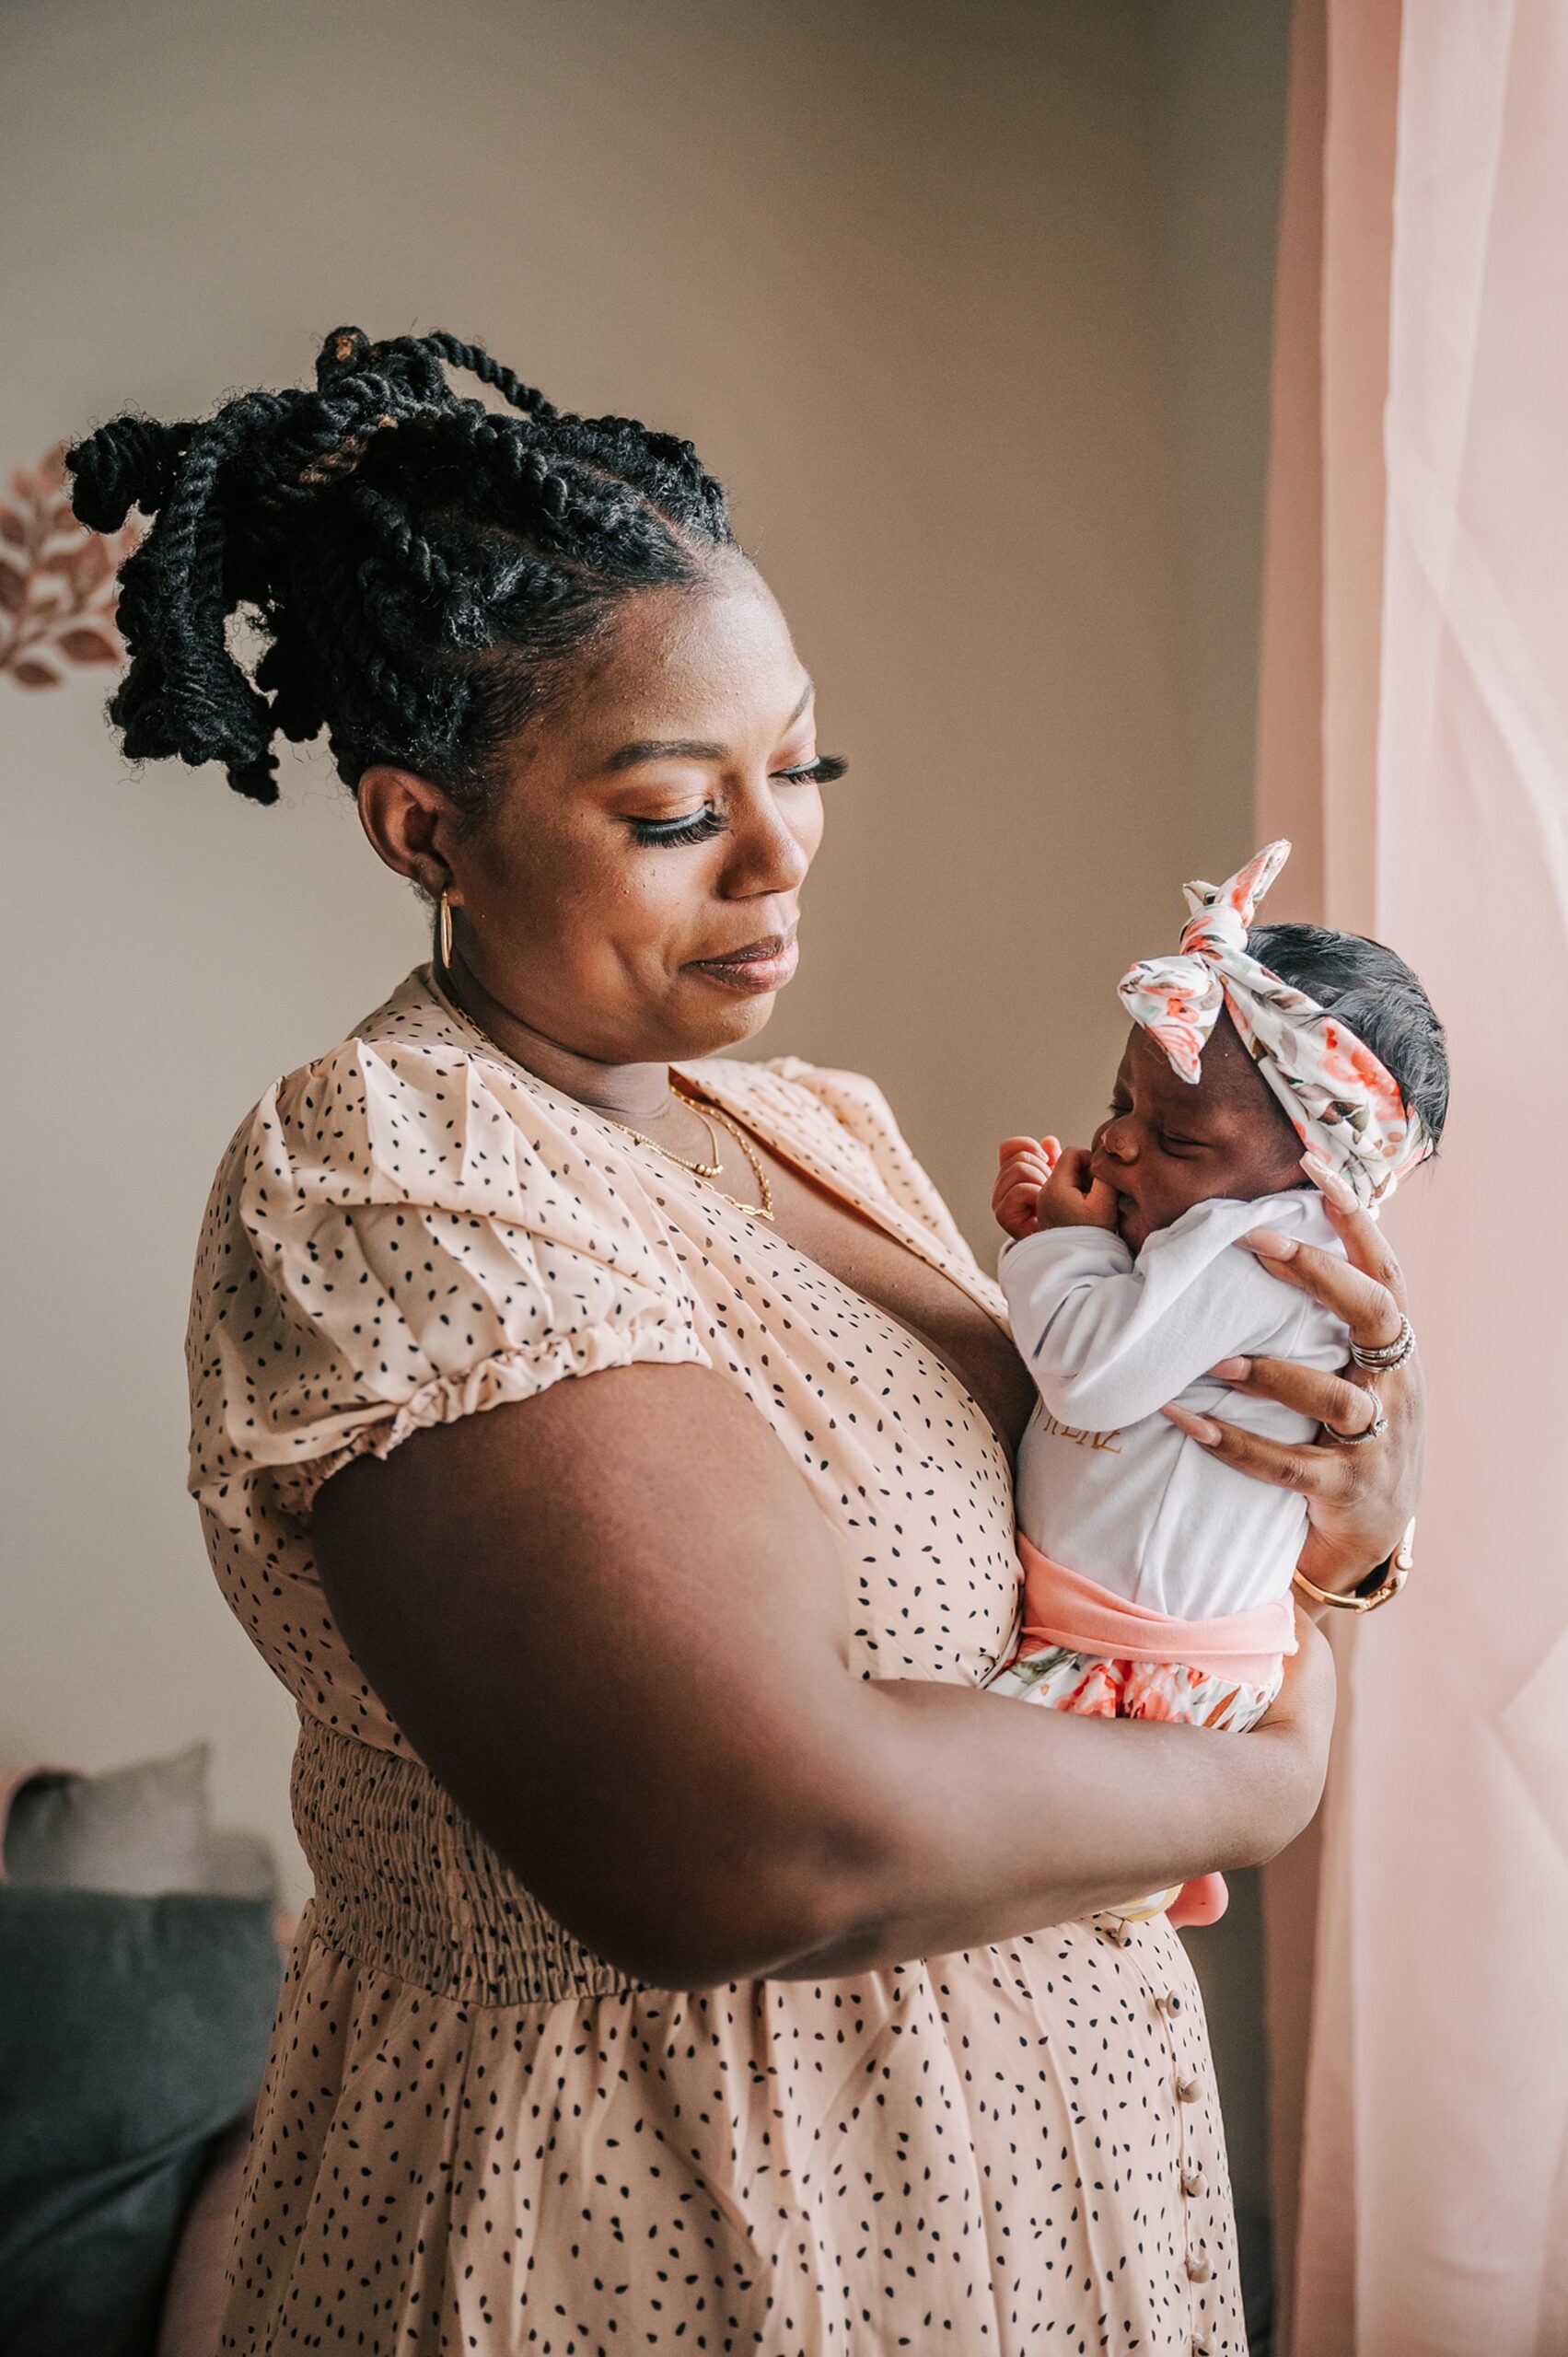 A mother stands by a window with pink curtains while holding her newborn baby daughter in her arms robinhood pediatrics winston salem